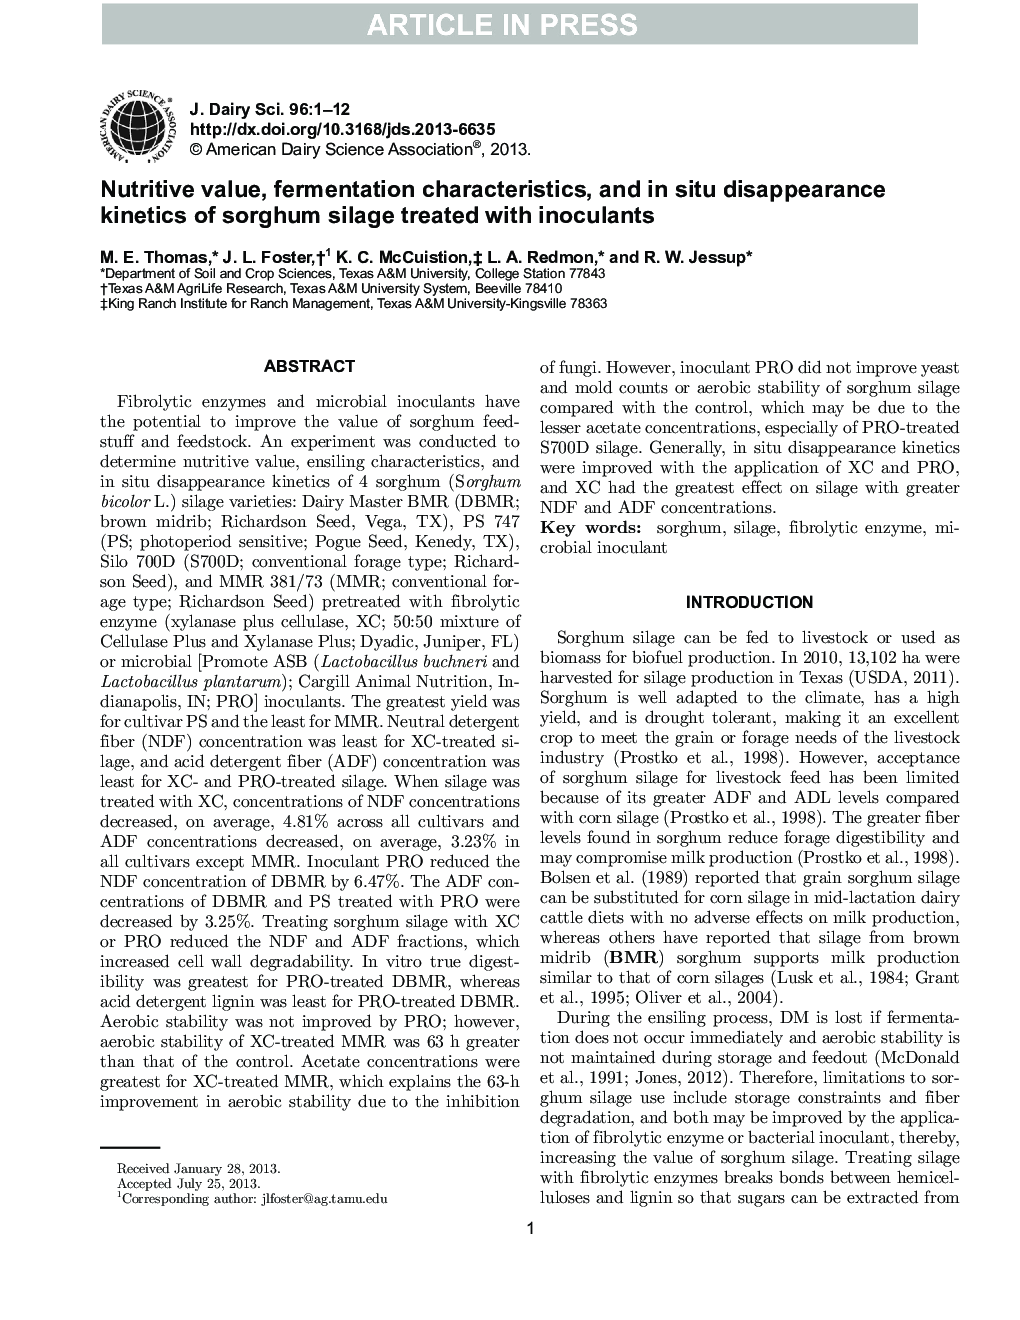 Nutritive value, fermentation characteristics, and in situ disappearance kinetics of sorghum silage treated with inoculants